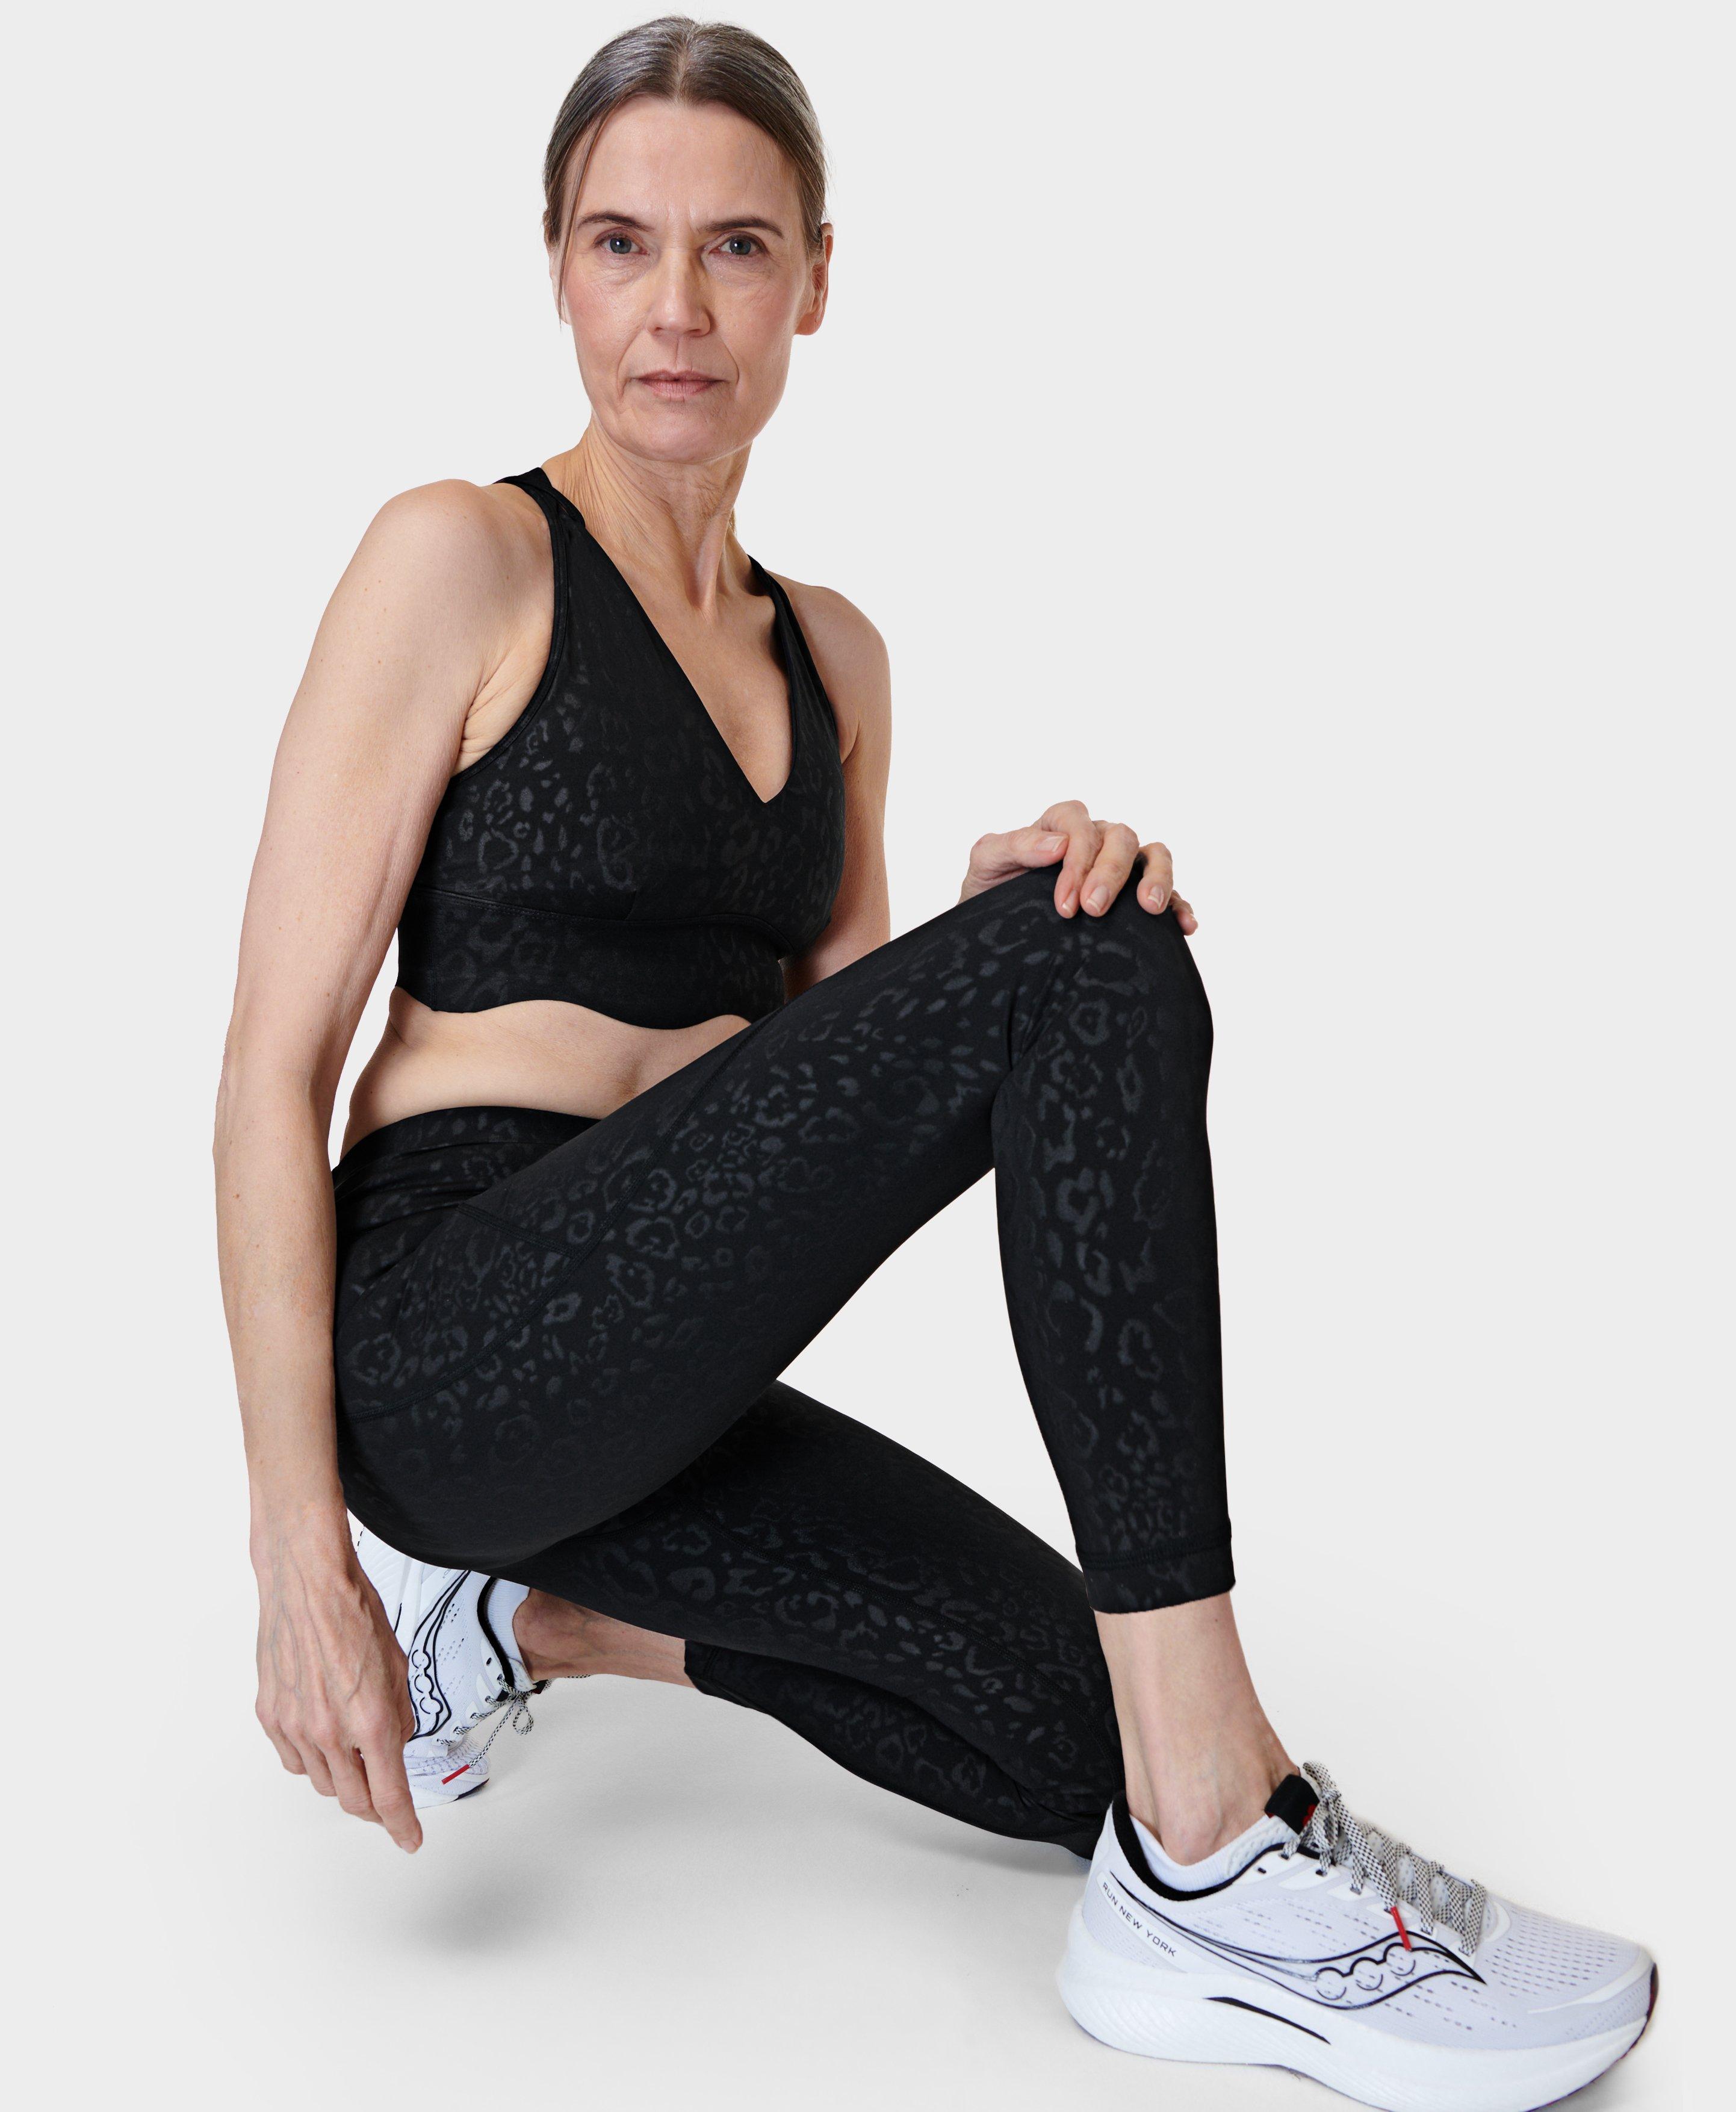 Leopard High Waist Leopard Print Gym Leggings For Women Seamless Gym  Tights, Yoga Pants, And Fitness Jogging Trousers By Adapt Animal From  Clothingdh, $29.94